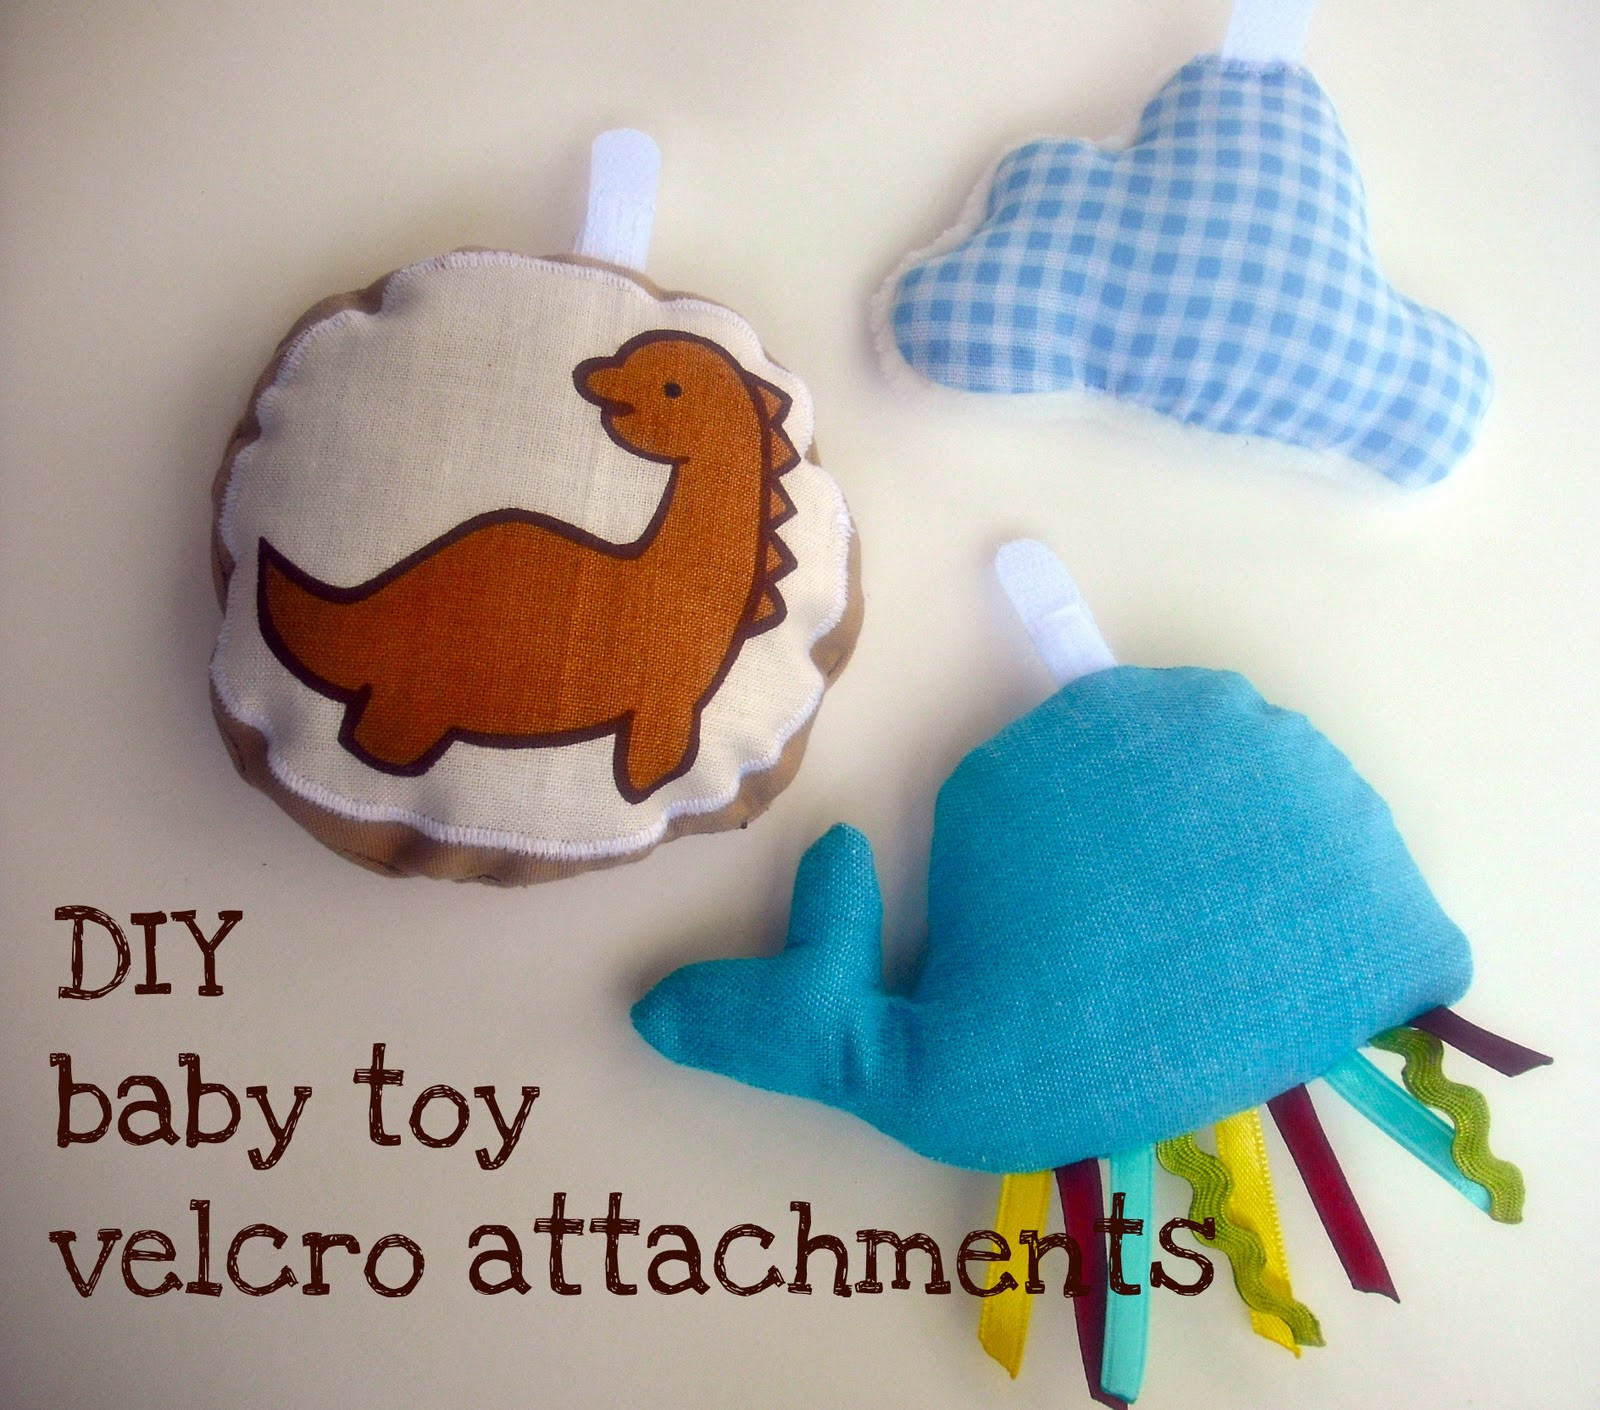 Diy Toys For Baby
 bedtime tales DIY baby toy velcro attachments